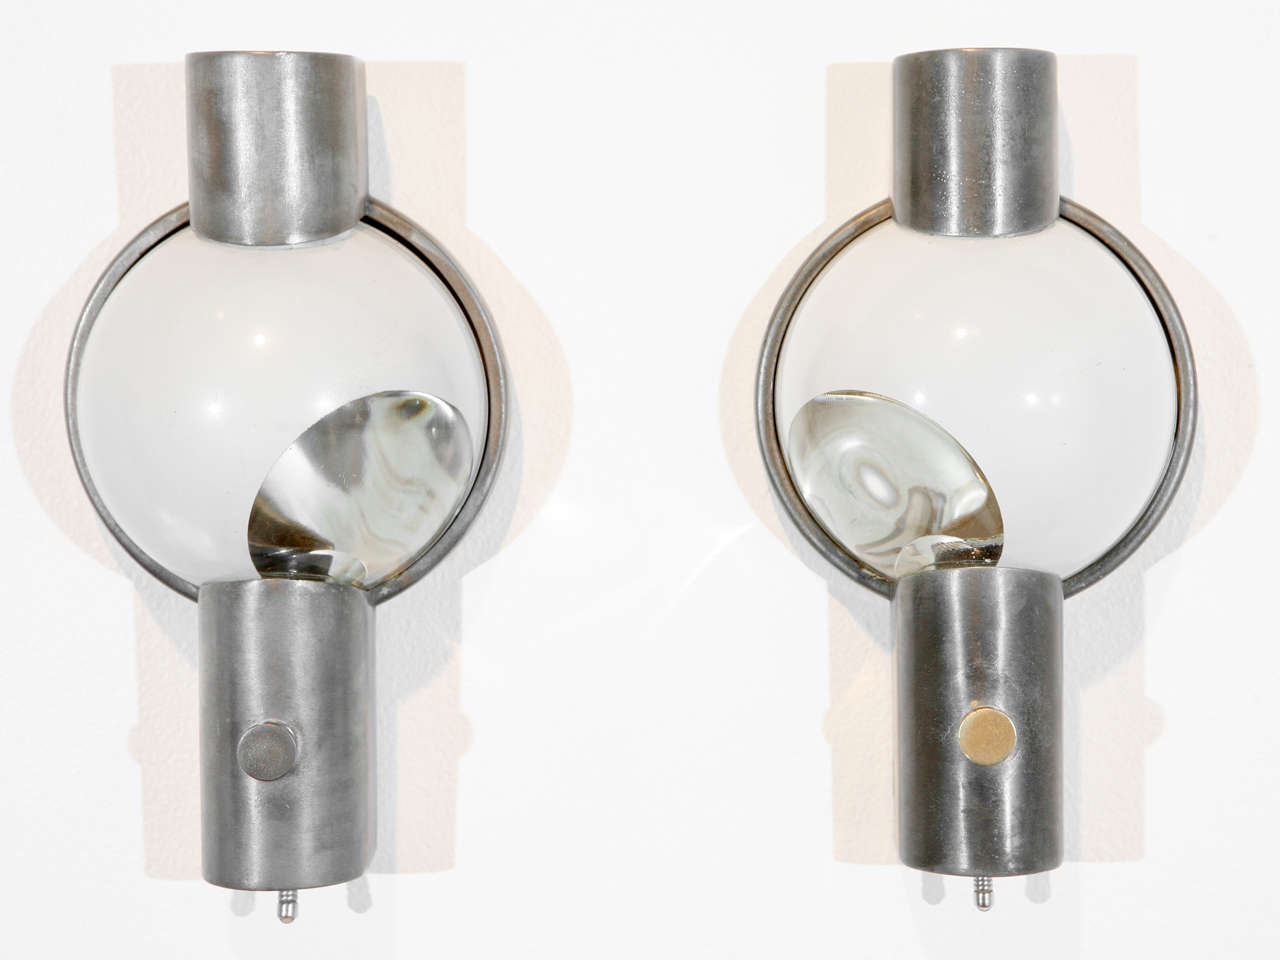 Pair of sconces designed by Henry Dreyfuss; originally used in trains. One sconce has a brass finial and one has a chrome finial.